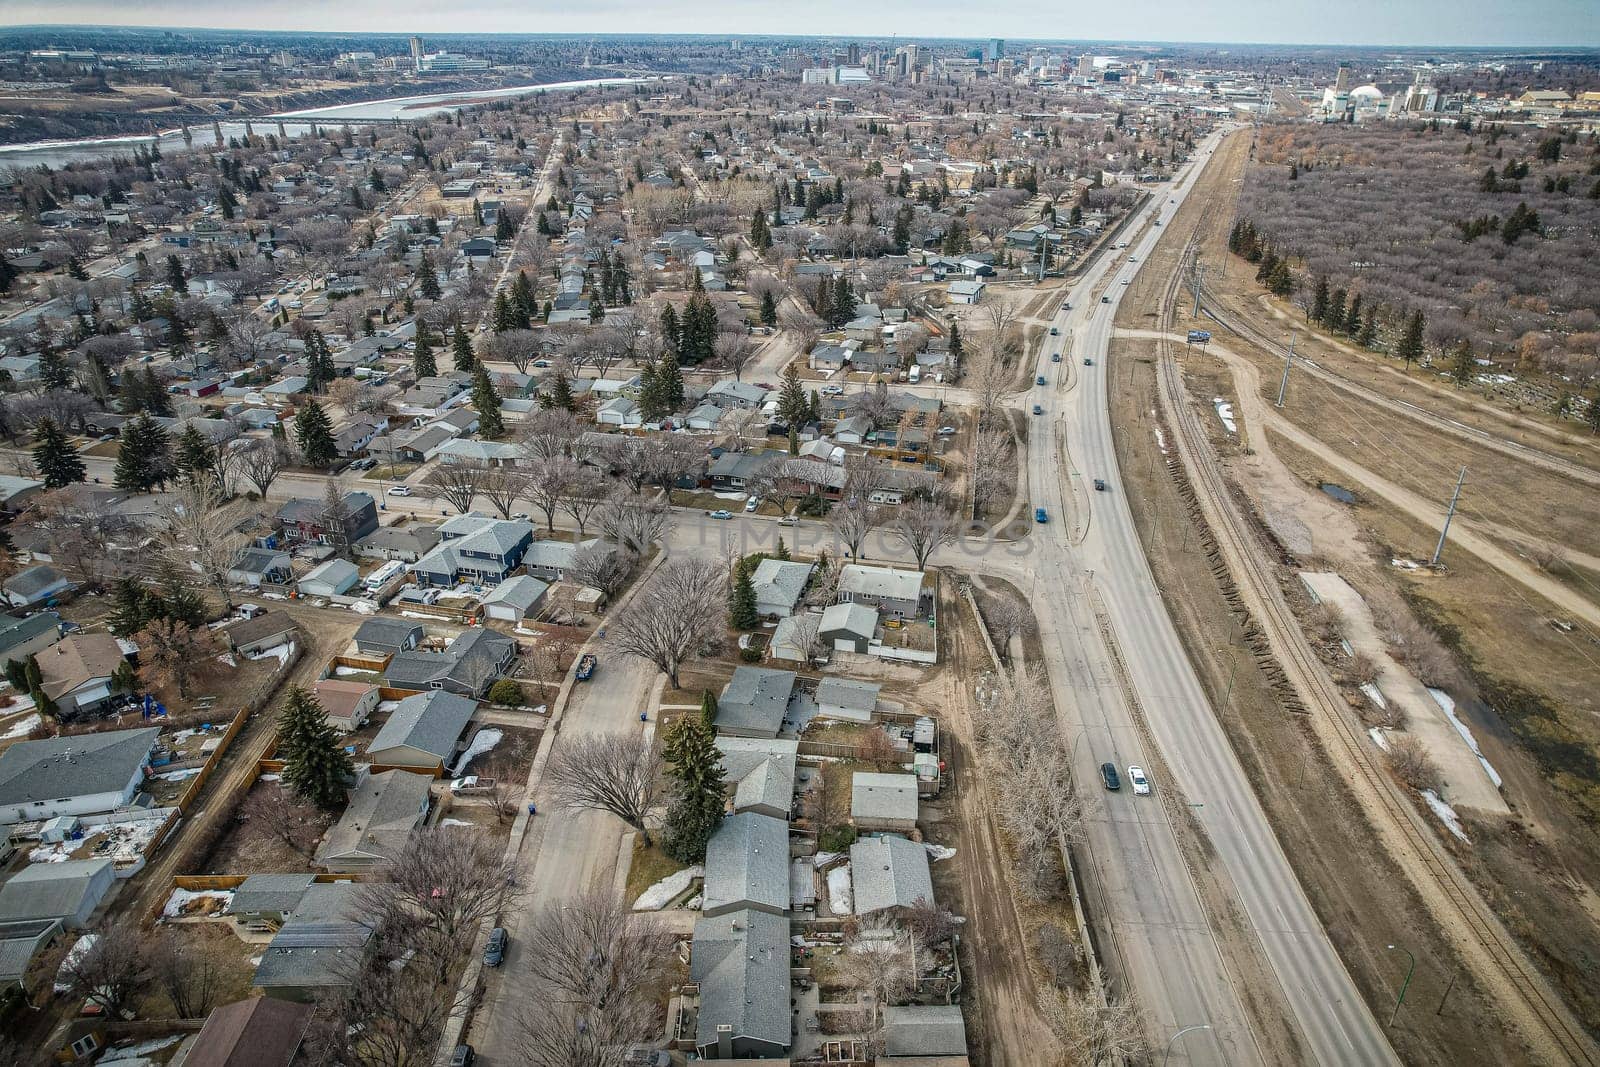 Drone image showcasing Richmond Heights, Saskatoon, with its quaint streets and residential areas.